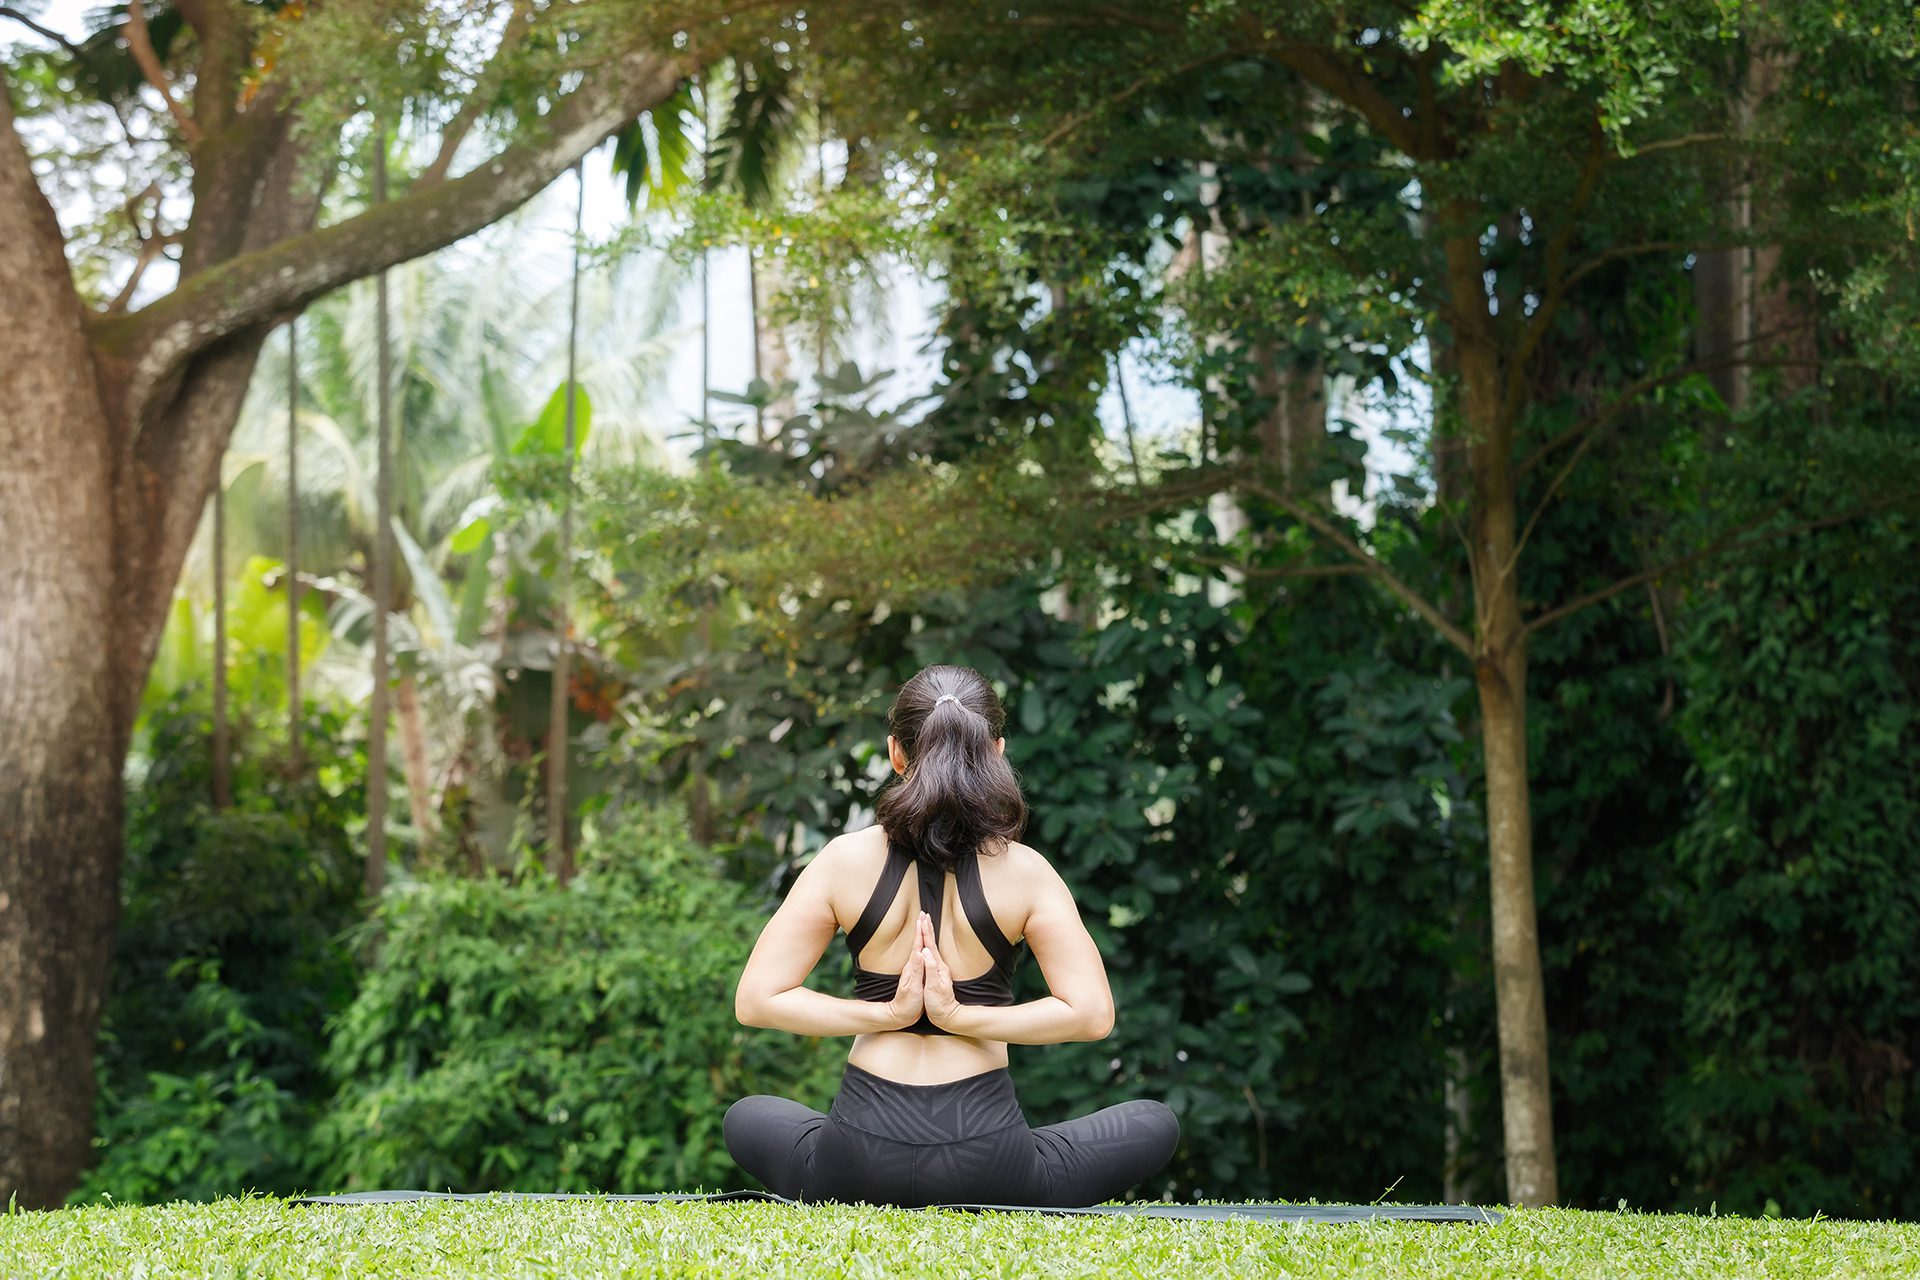 What to look for in a high standard Yoga Teacher Training in Bali?